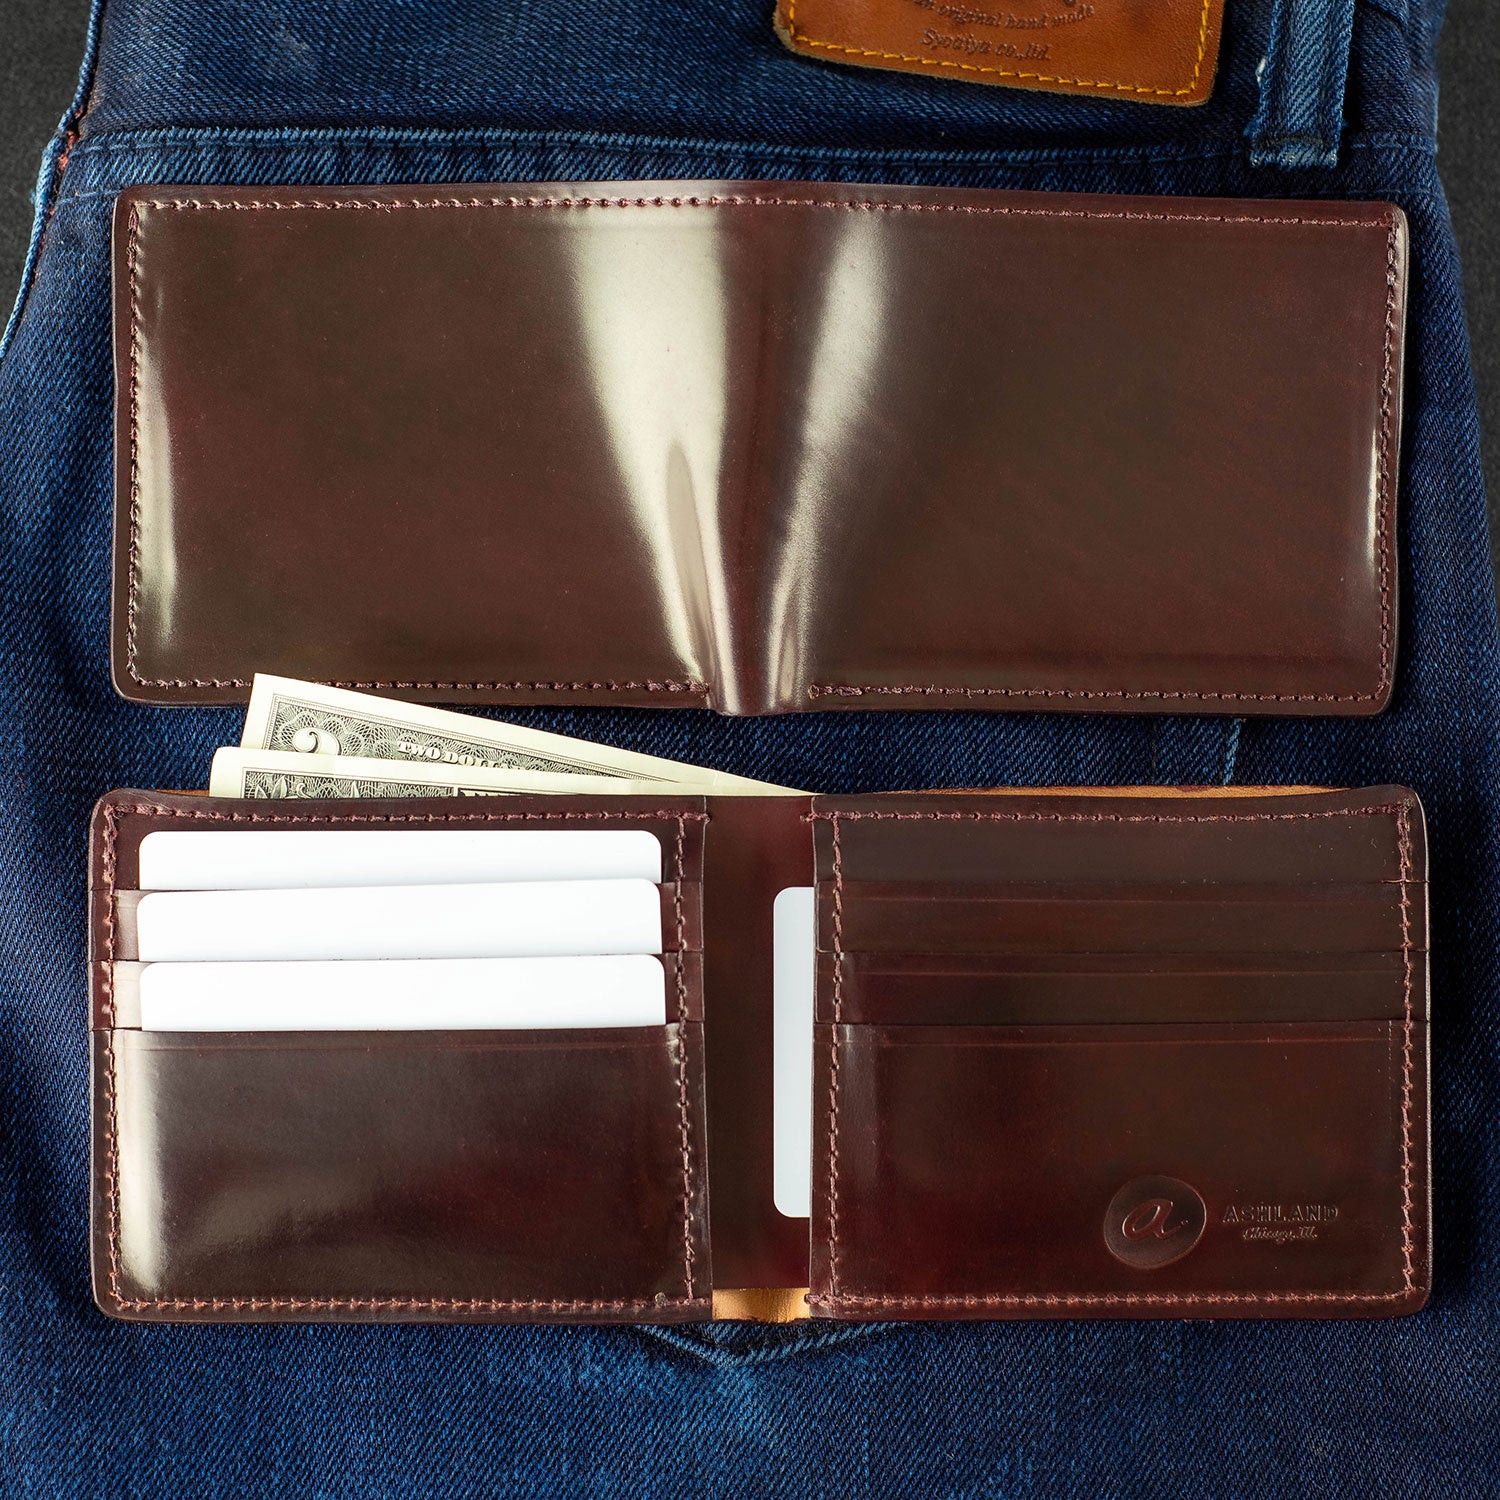 Almost Perfect Bifold Leather Wallet